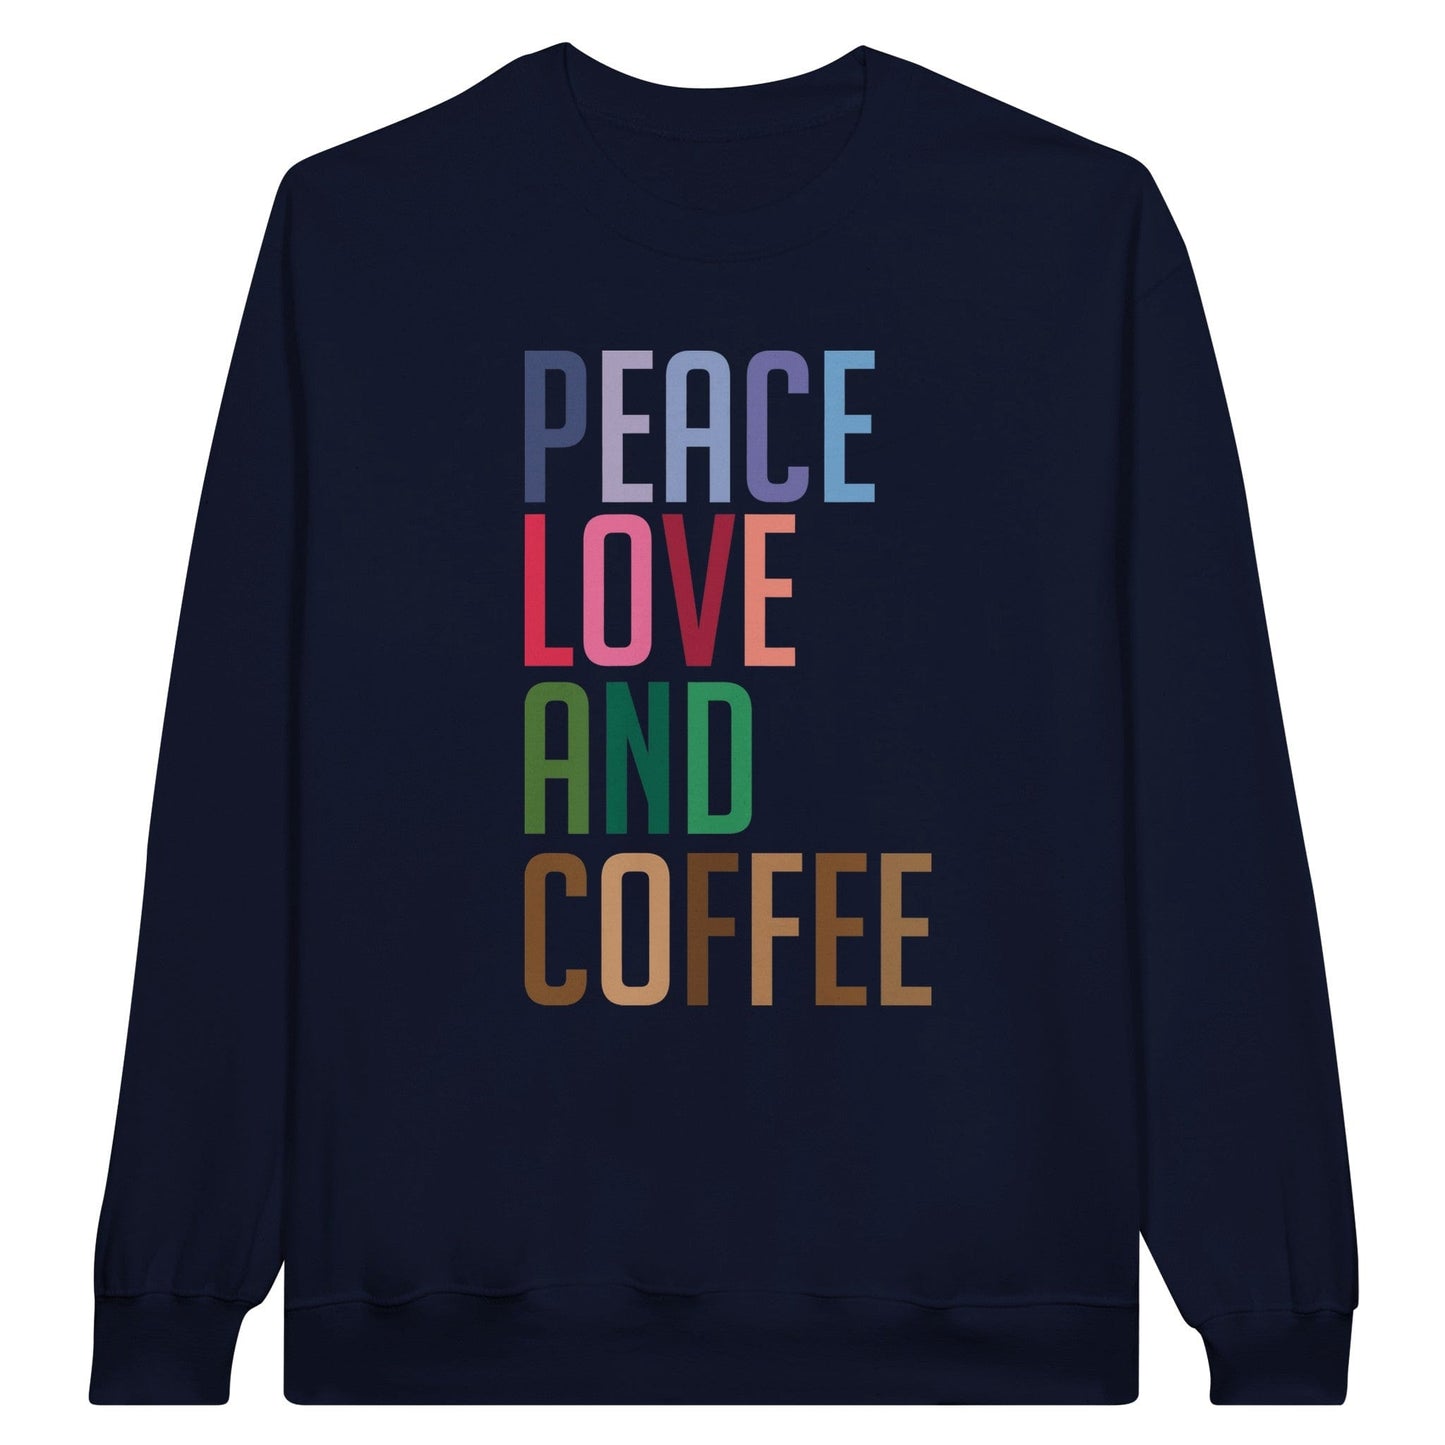 Good Bean Gifts Copy of "Peace Love and Coffee" - Classic Unisex Crewneck Sweatshirt S / Navy